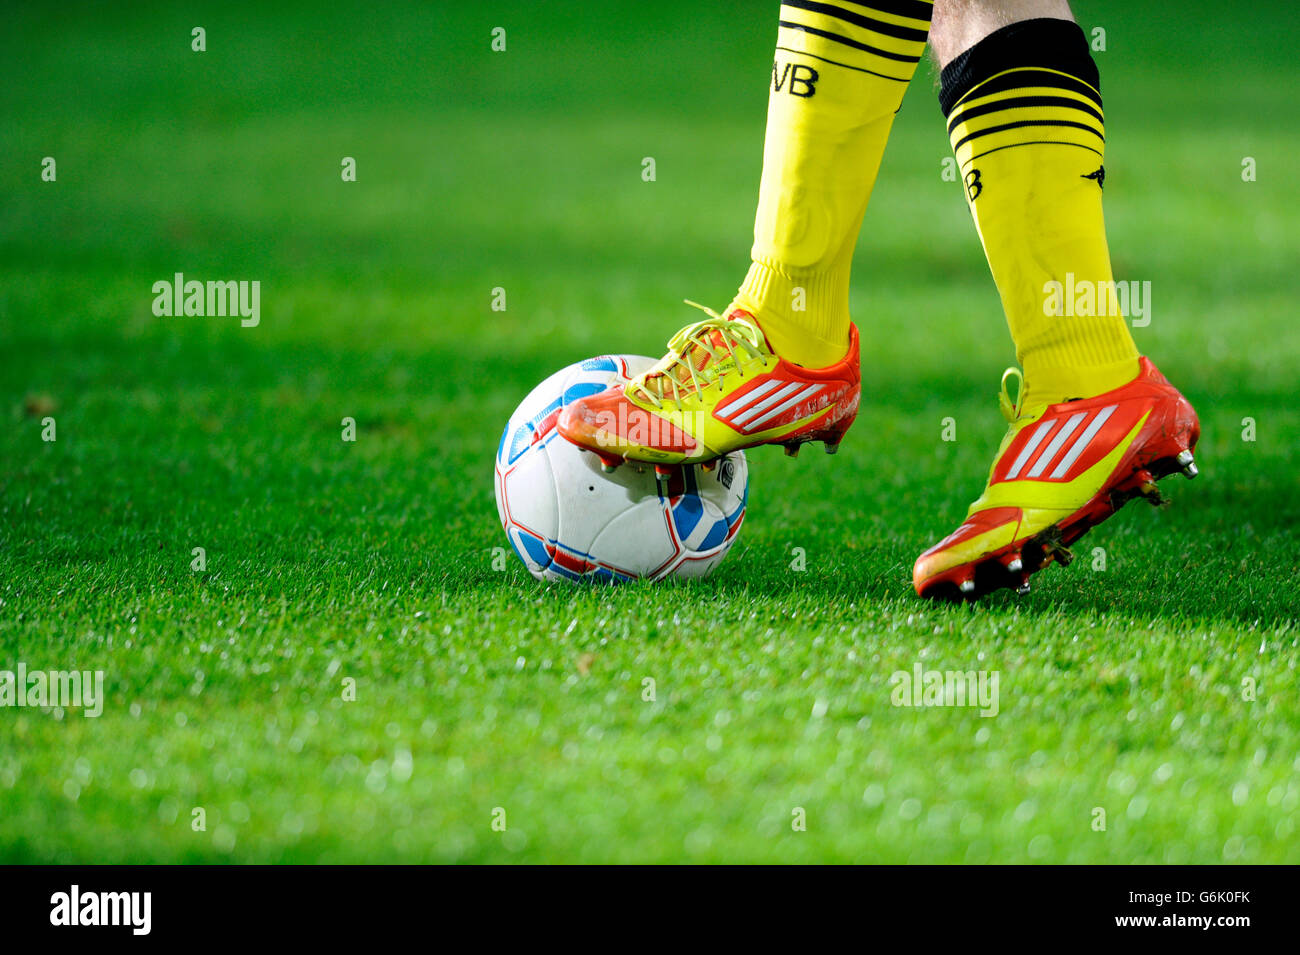 Legs and Adidas shoes of a Dortmund player with the league ball,  preparatory match for the second round of the tournament season Stock Photo  - Alamy